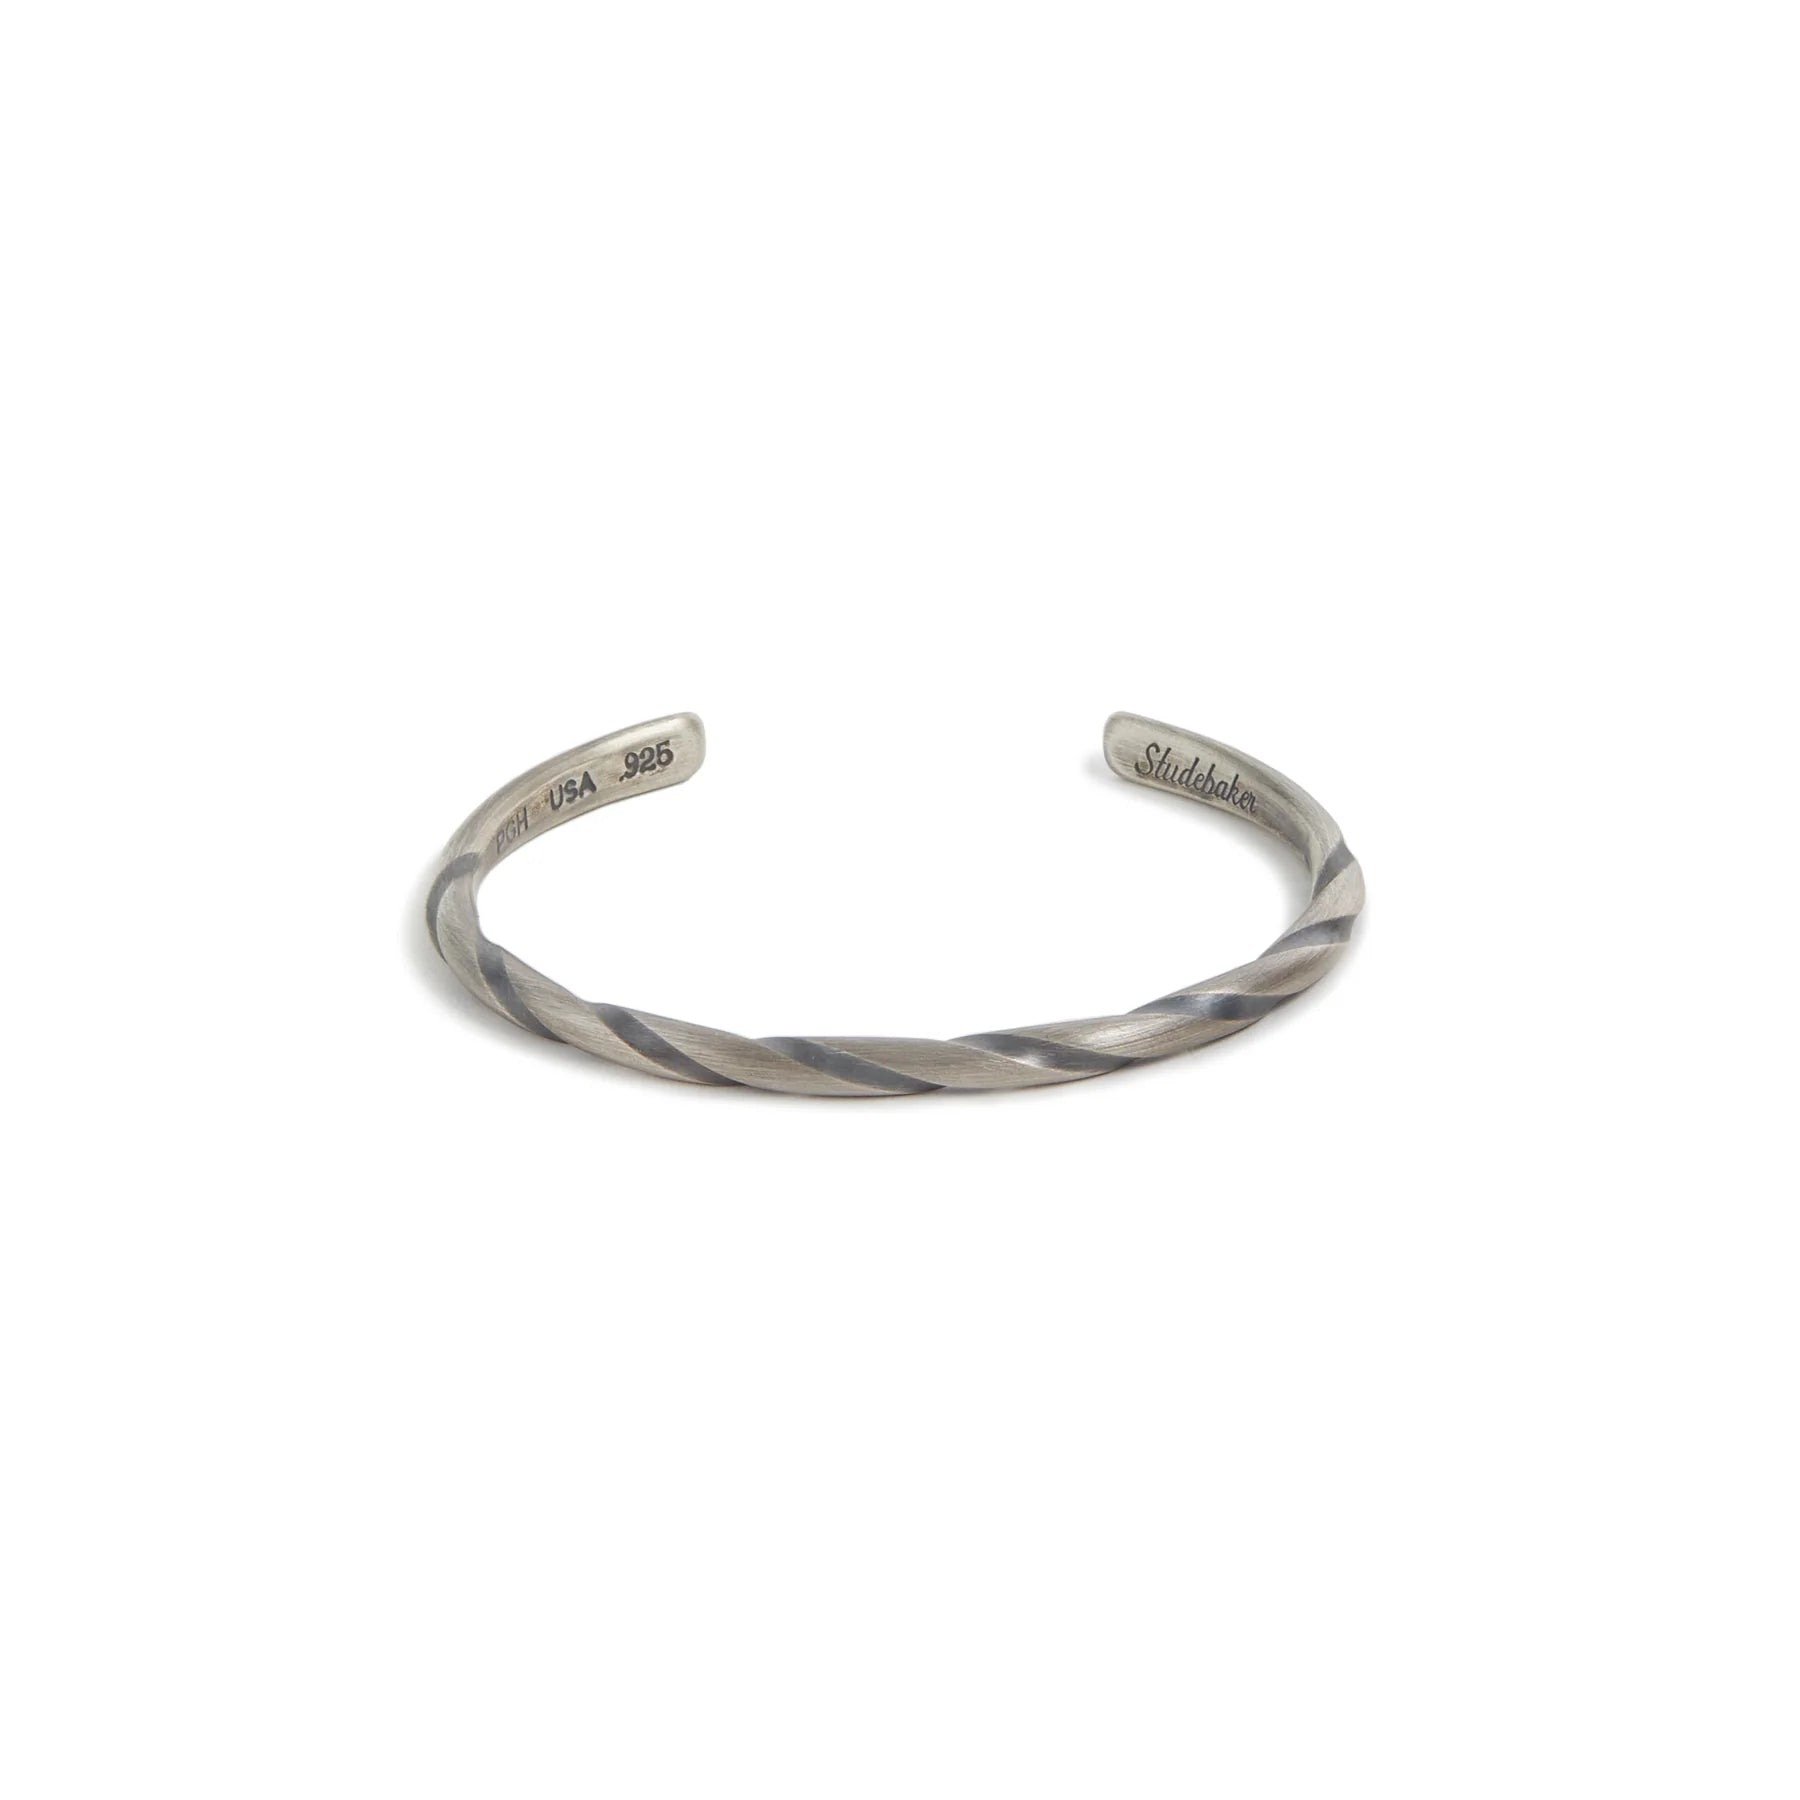 Studebaker - Rotary Cuff - Large-Men&#39;s Accessories-Silver-Yaletown-Vancouver-Surrey-Canada